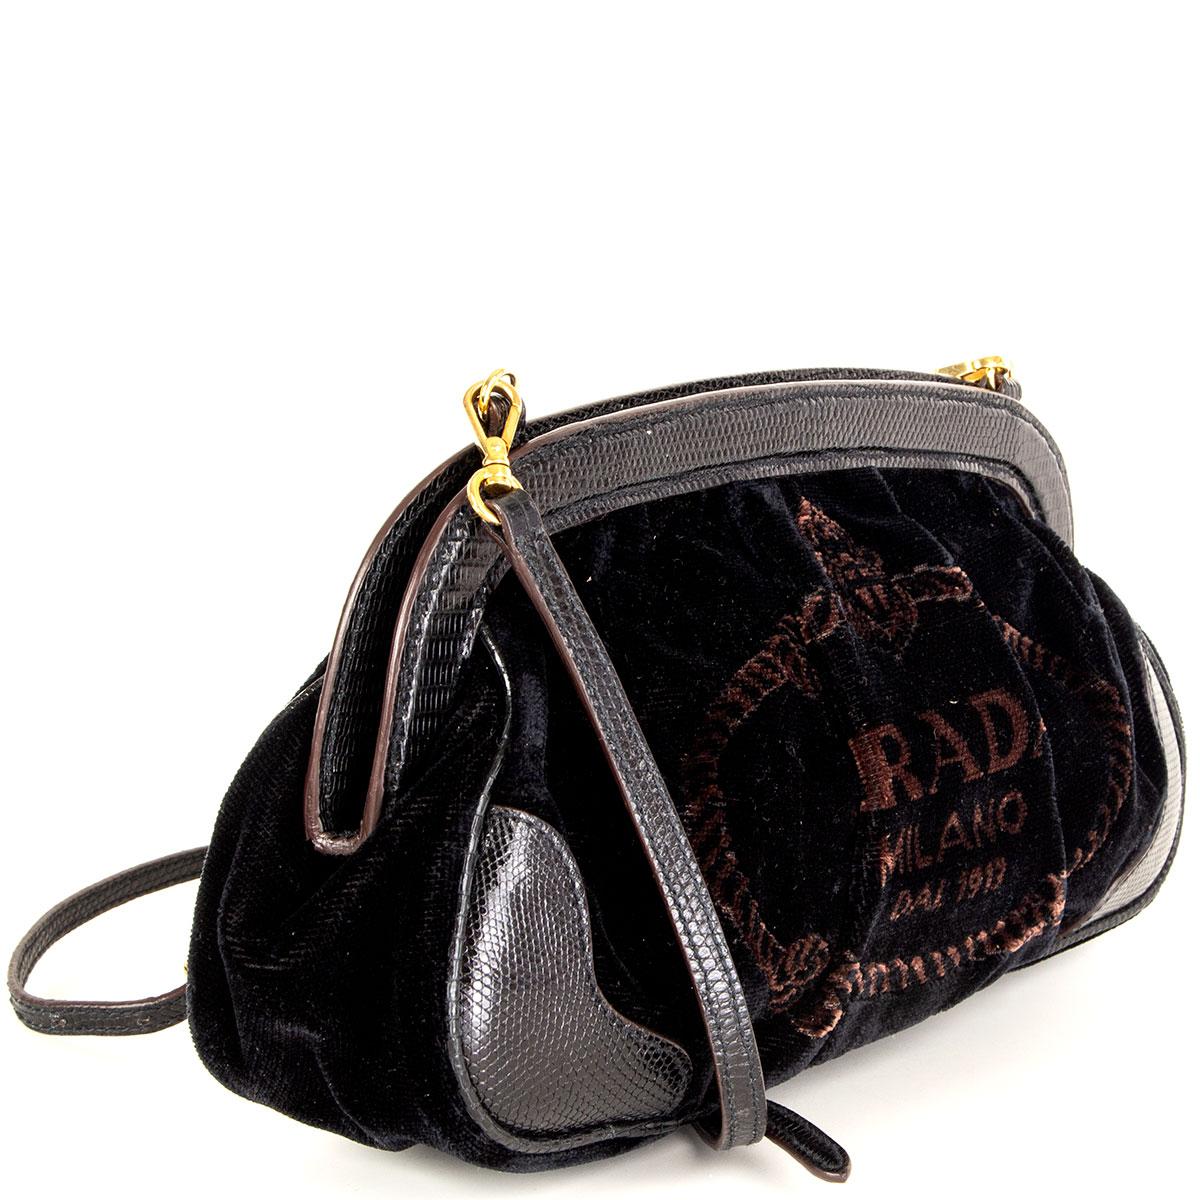 100% authentic Prada logo print cross-body bag in black velvet and lizard embossed leather strap and trimmings. Opens with two magnetic buttons on top and is lined in black nylon with one open pocket against the back. Has been worn and is in